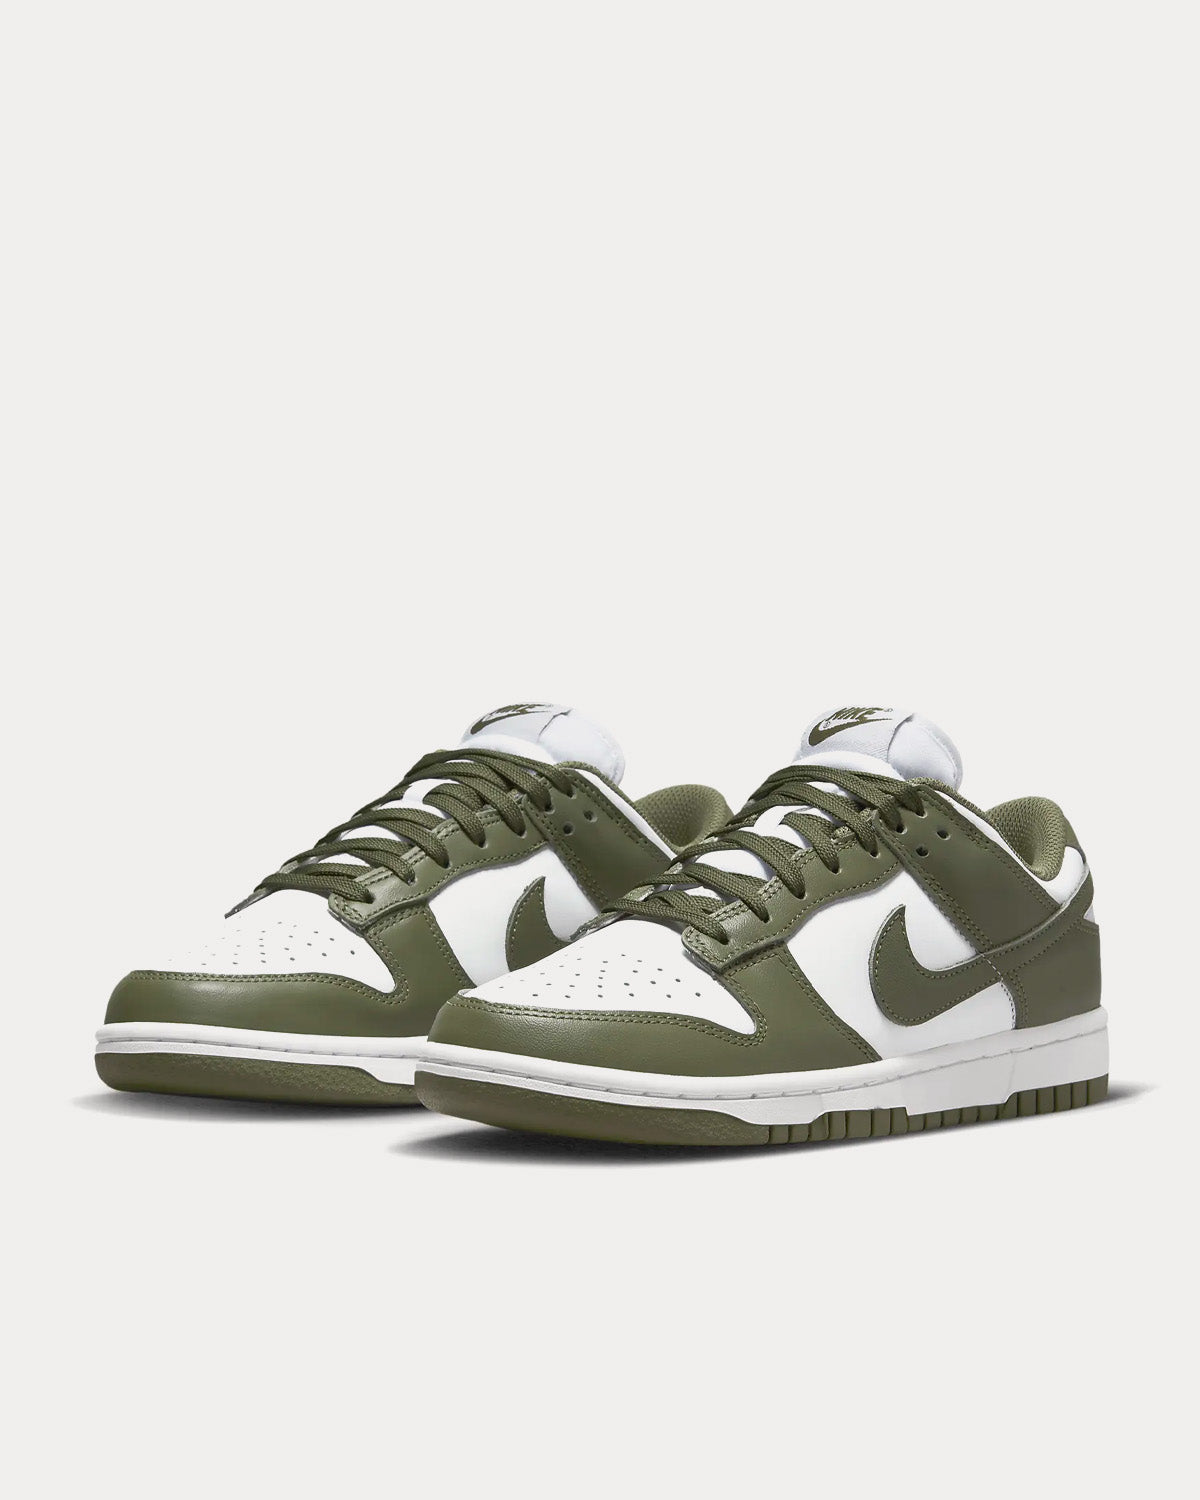 Nike - Dunk Low White / White / Medium Olive Low Top Sneakers